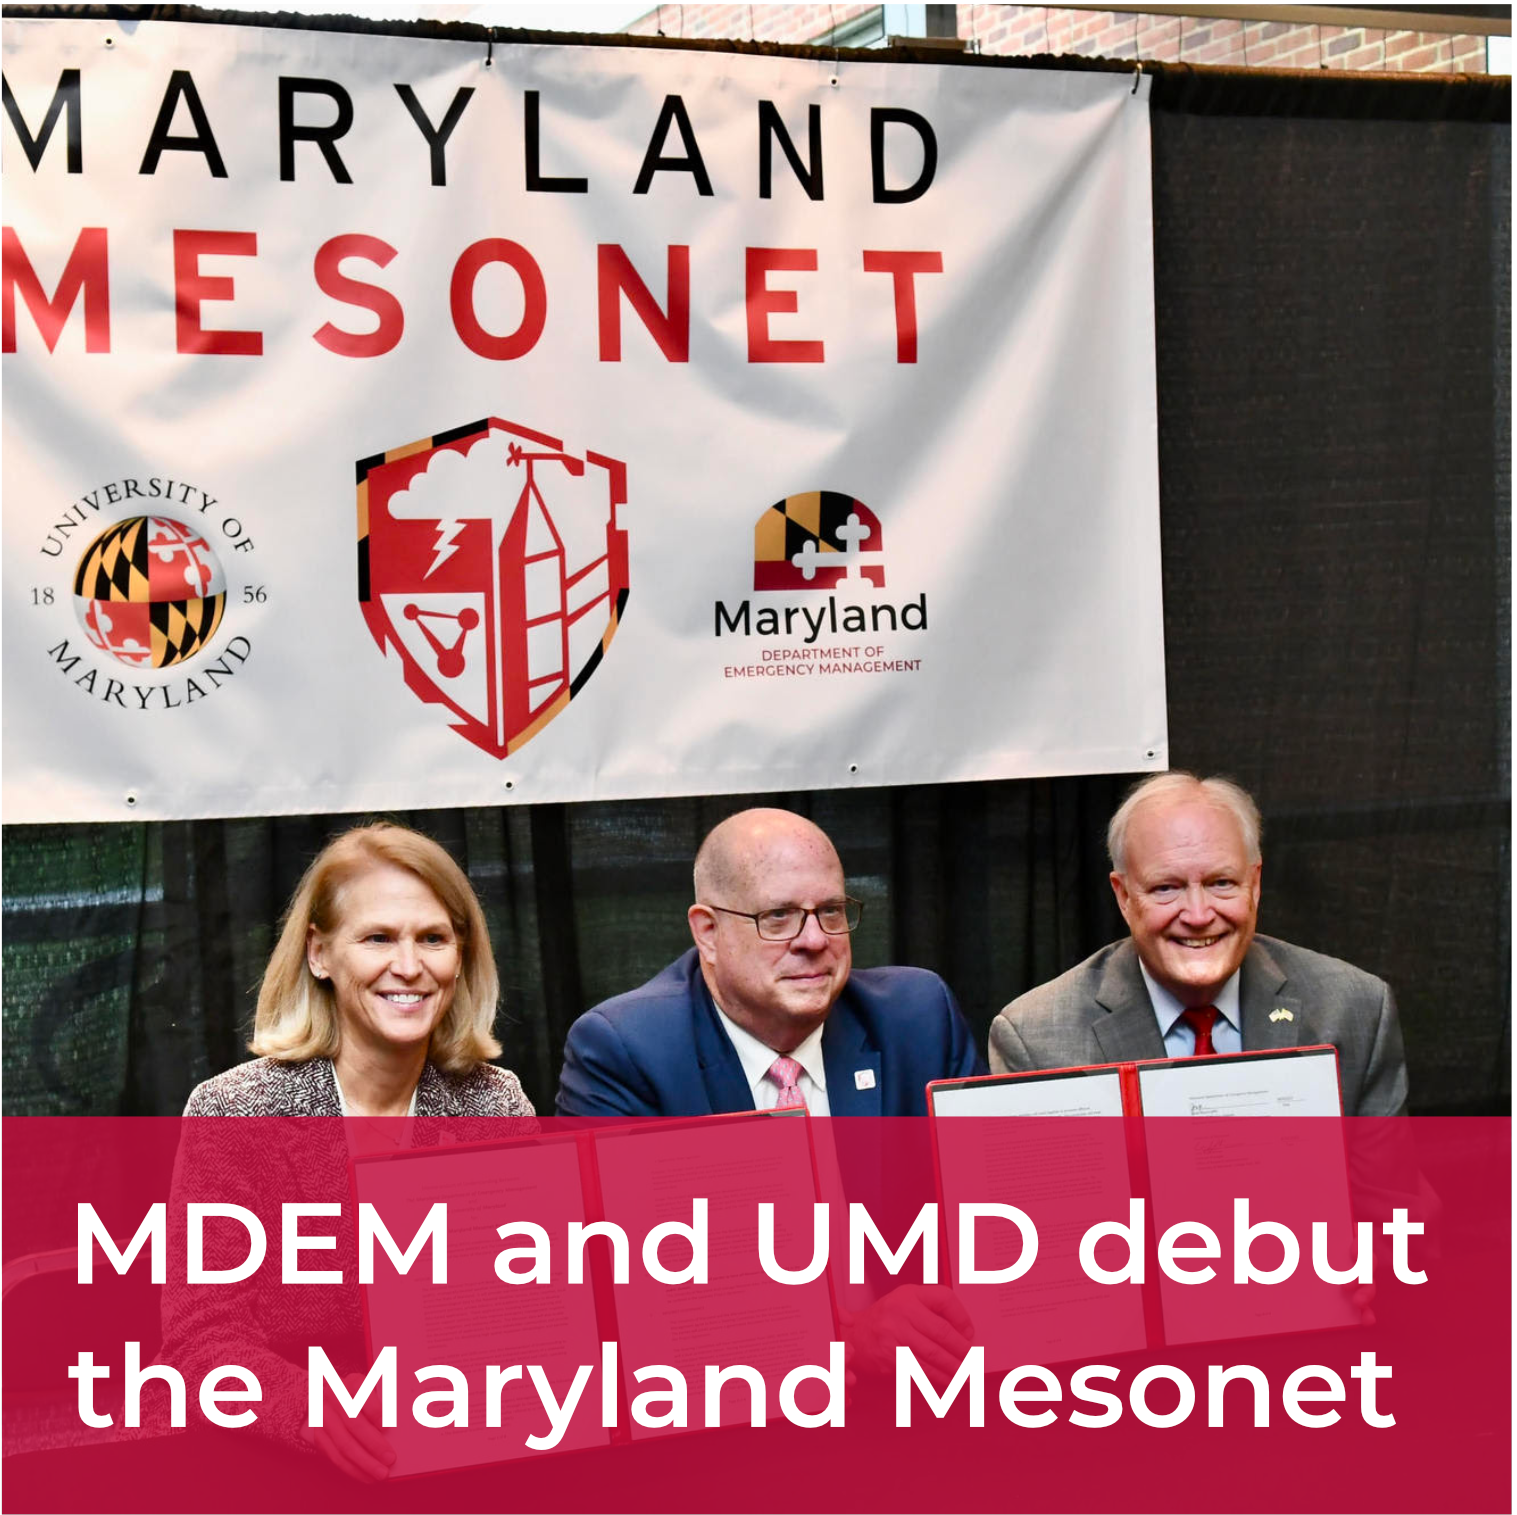 A clickable tile with the words "MDEM and UMD debut the Maryland Mesonet" overlaid on an image of the signing ceremony